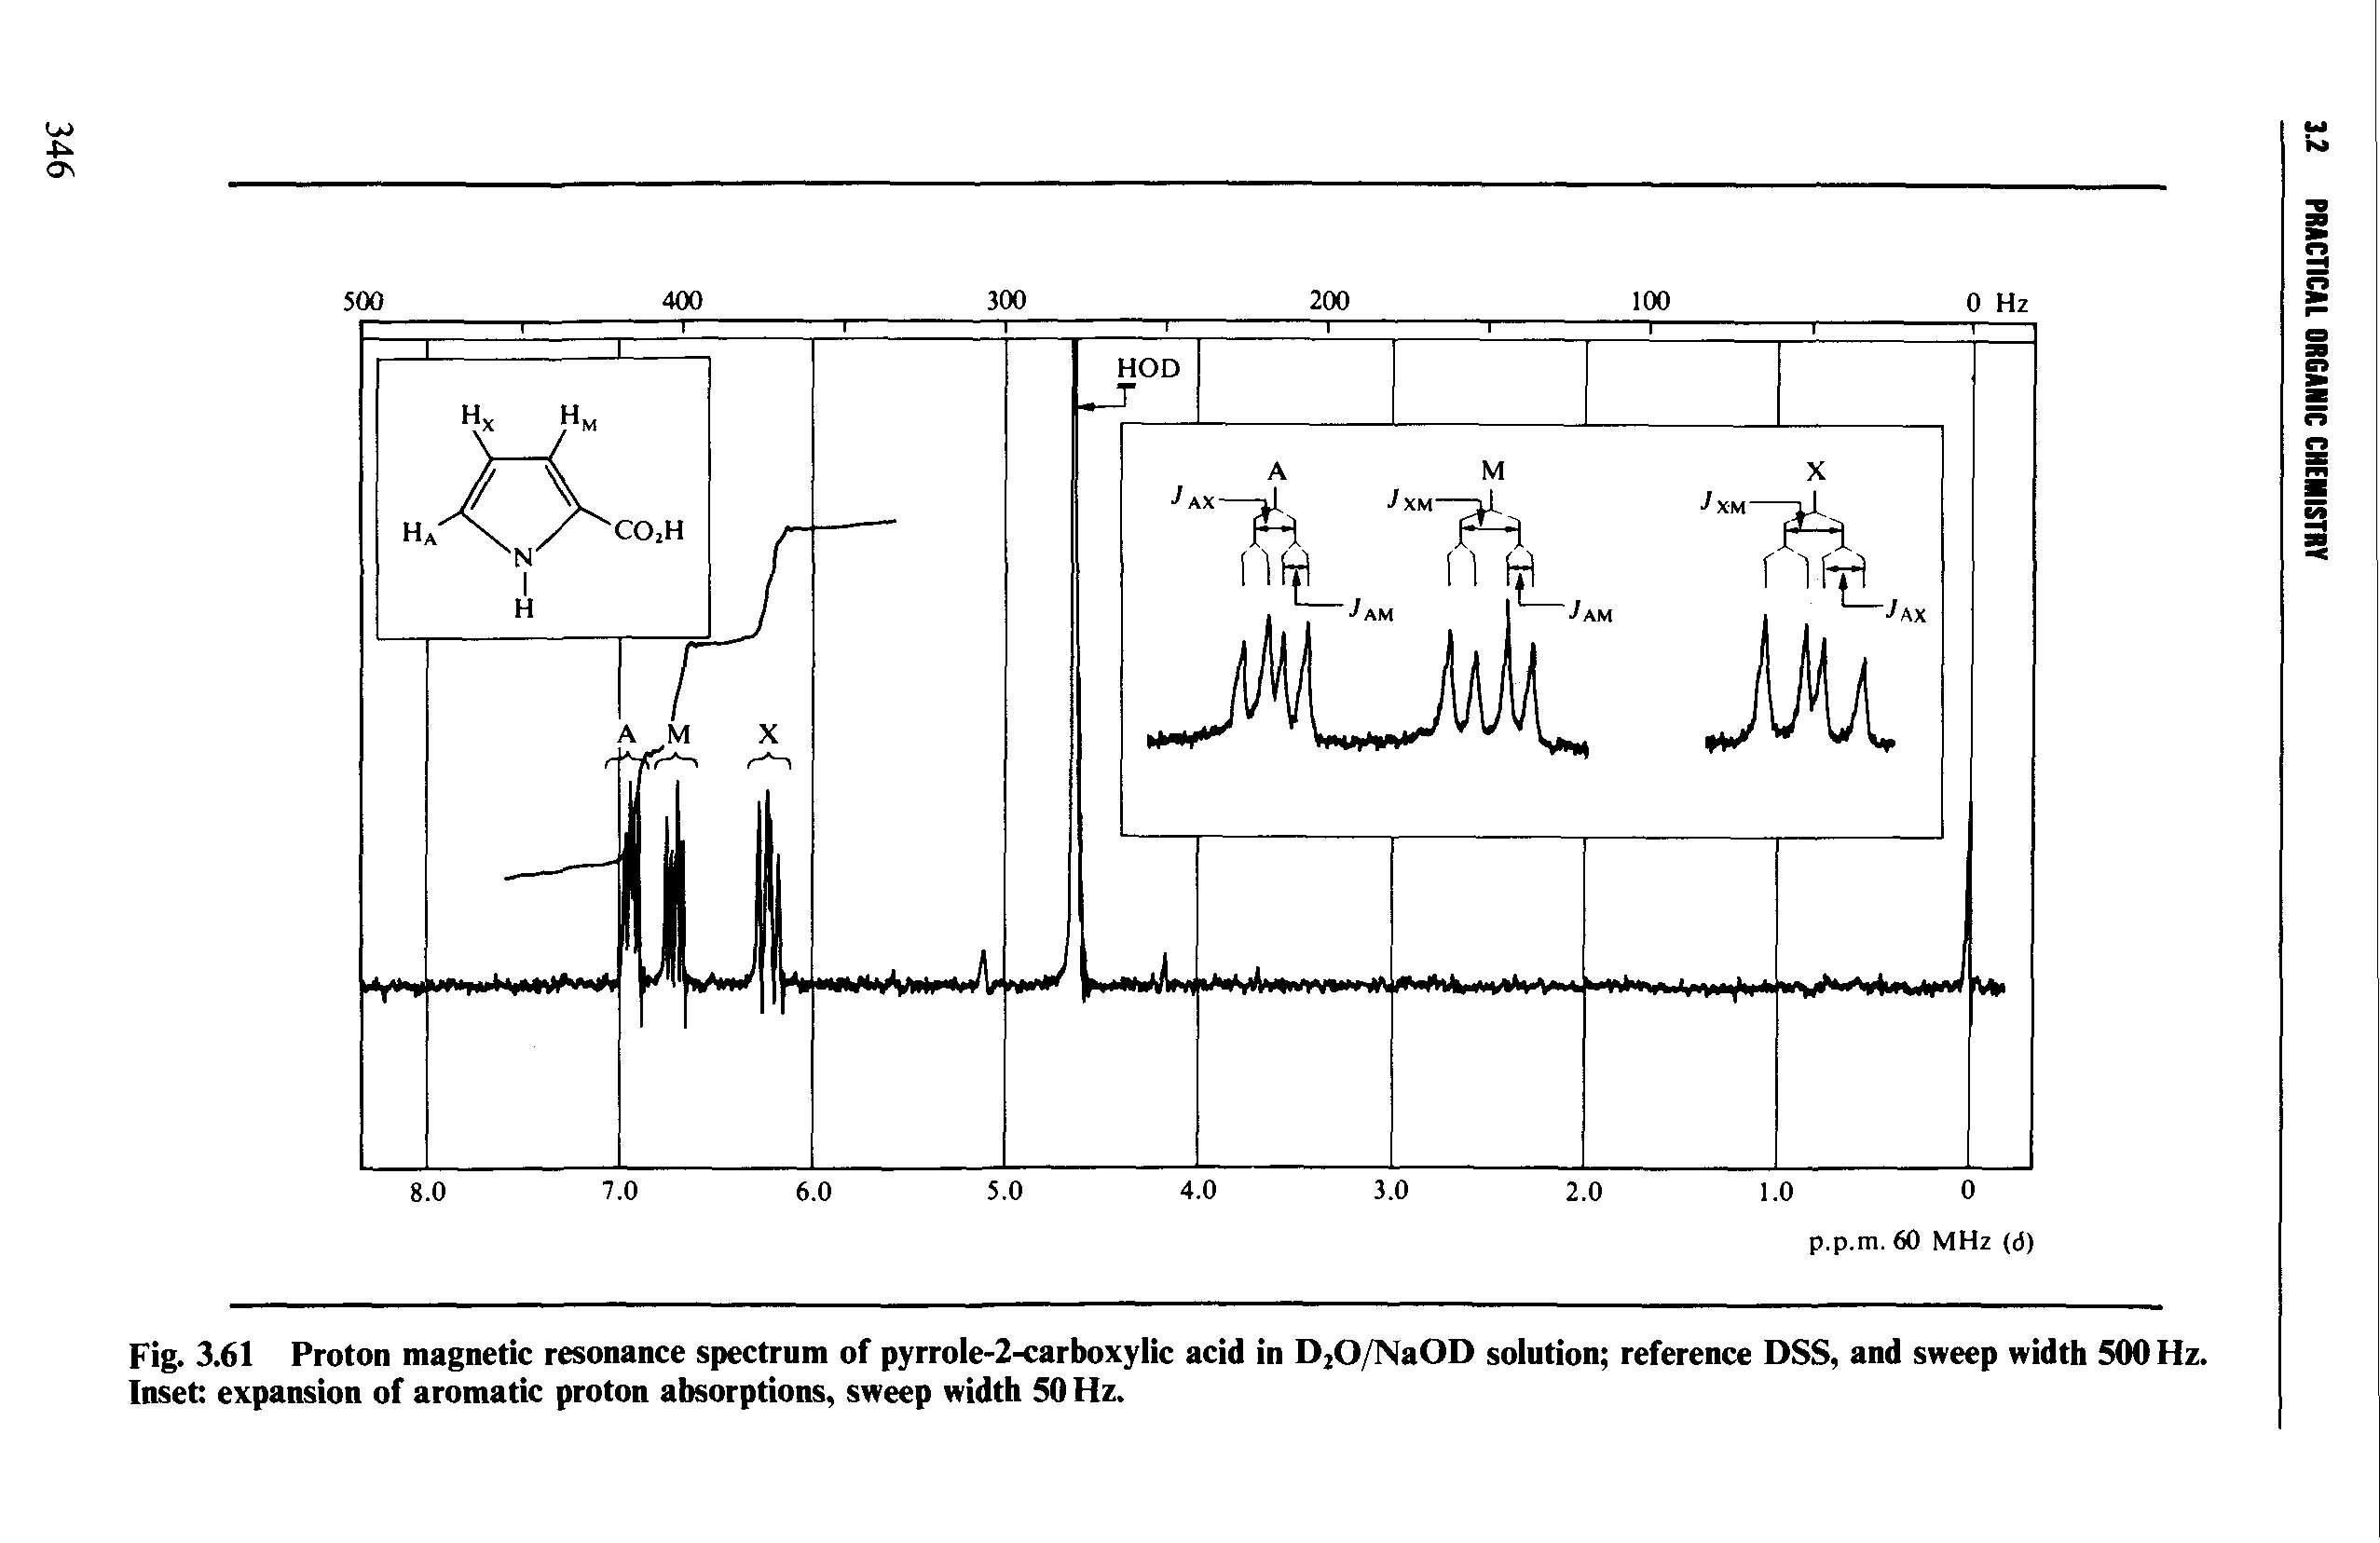 Fig. 3.61 Proton magnetic resonance spectrum of pyrrole-2-carboxylic acid in DzO/NaOD solution reference DSS, and sweep width 500 Hz. Inset expansion of aromatic proton absorptions, sweep width 50 Hz.